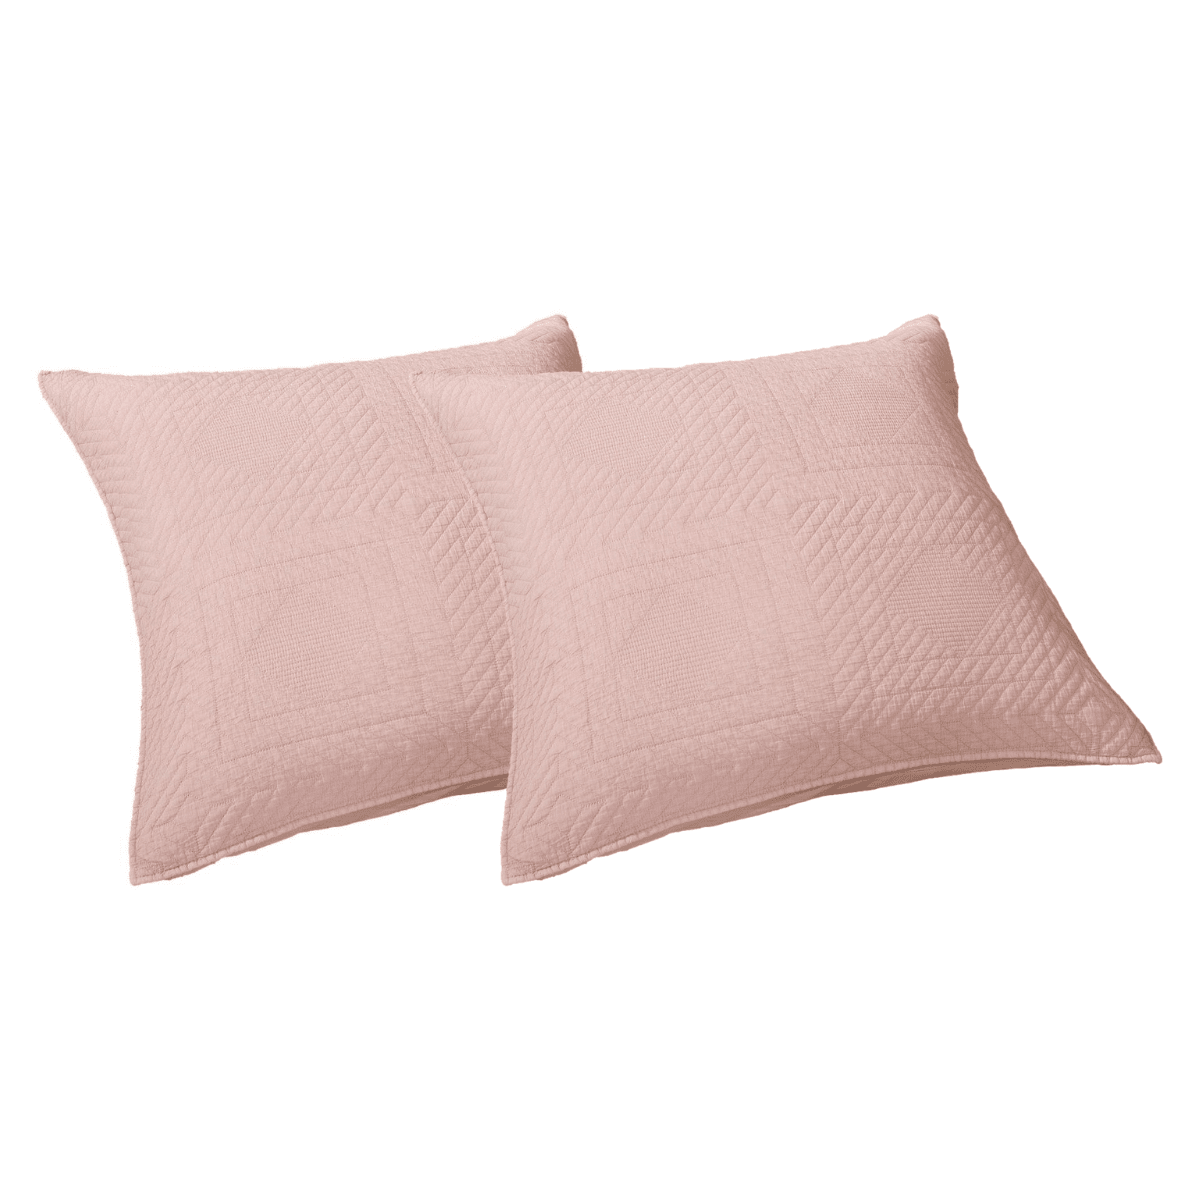 Tache Cotton Stone Washed Soothing Pastel Rustic Blush Pink Cushion Covers / Euro Sham (JHW-863) - Tache Home Fashion